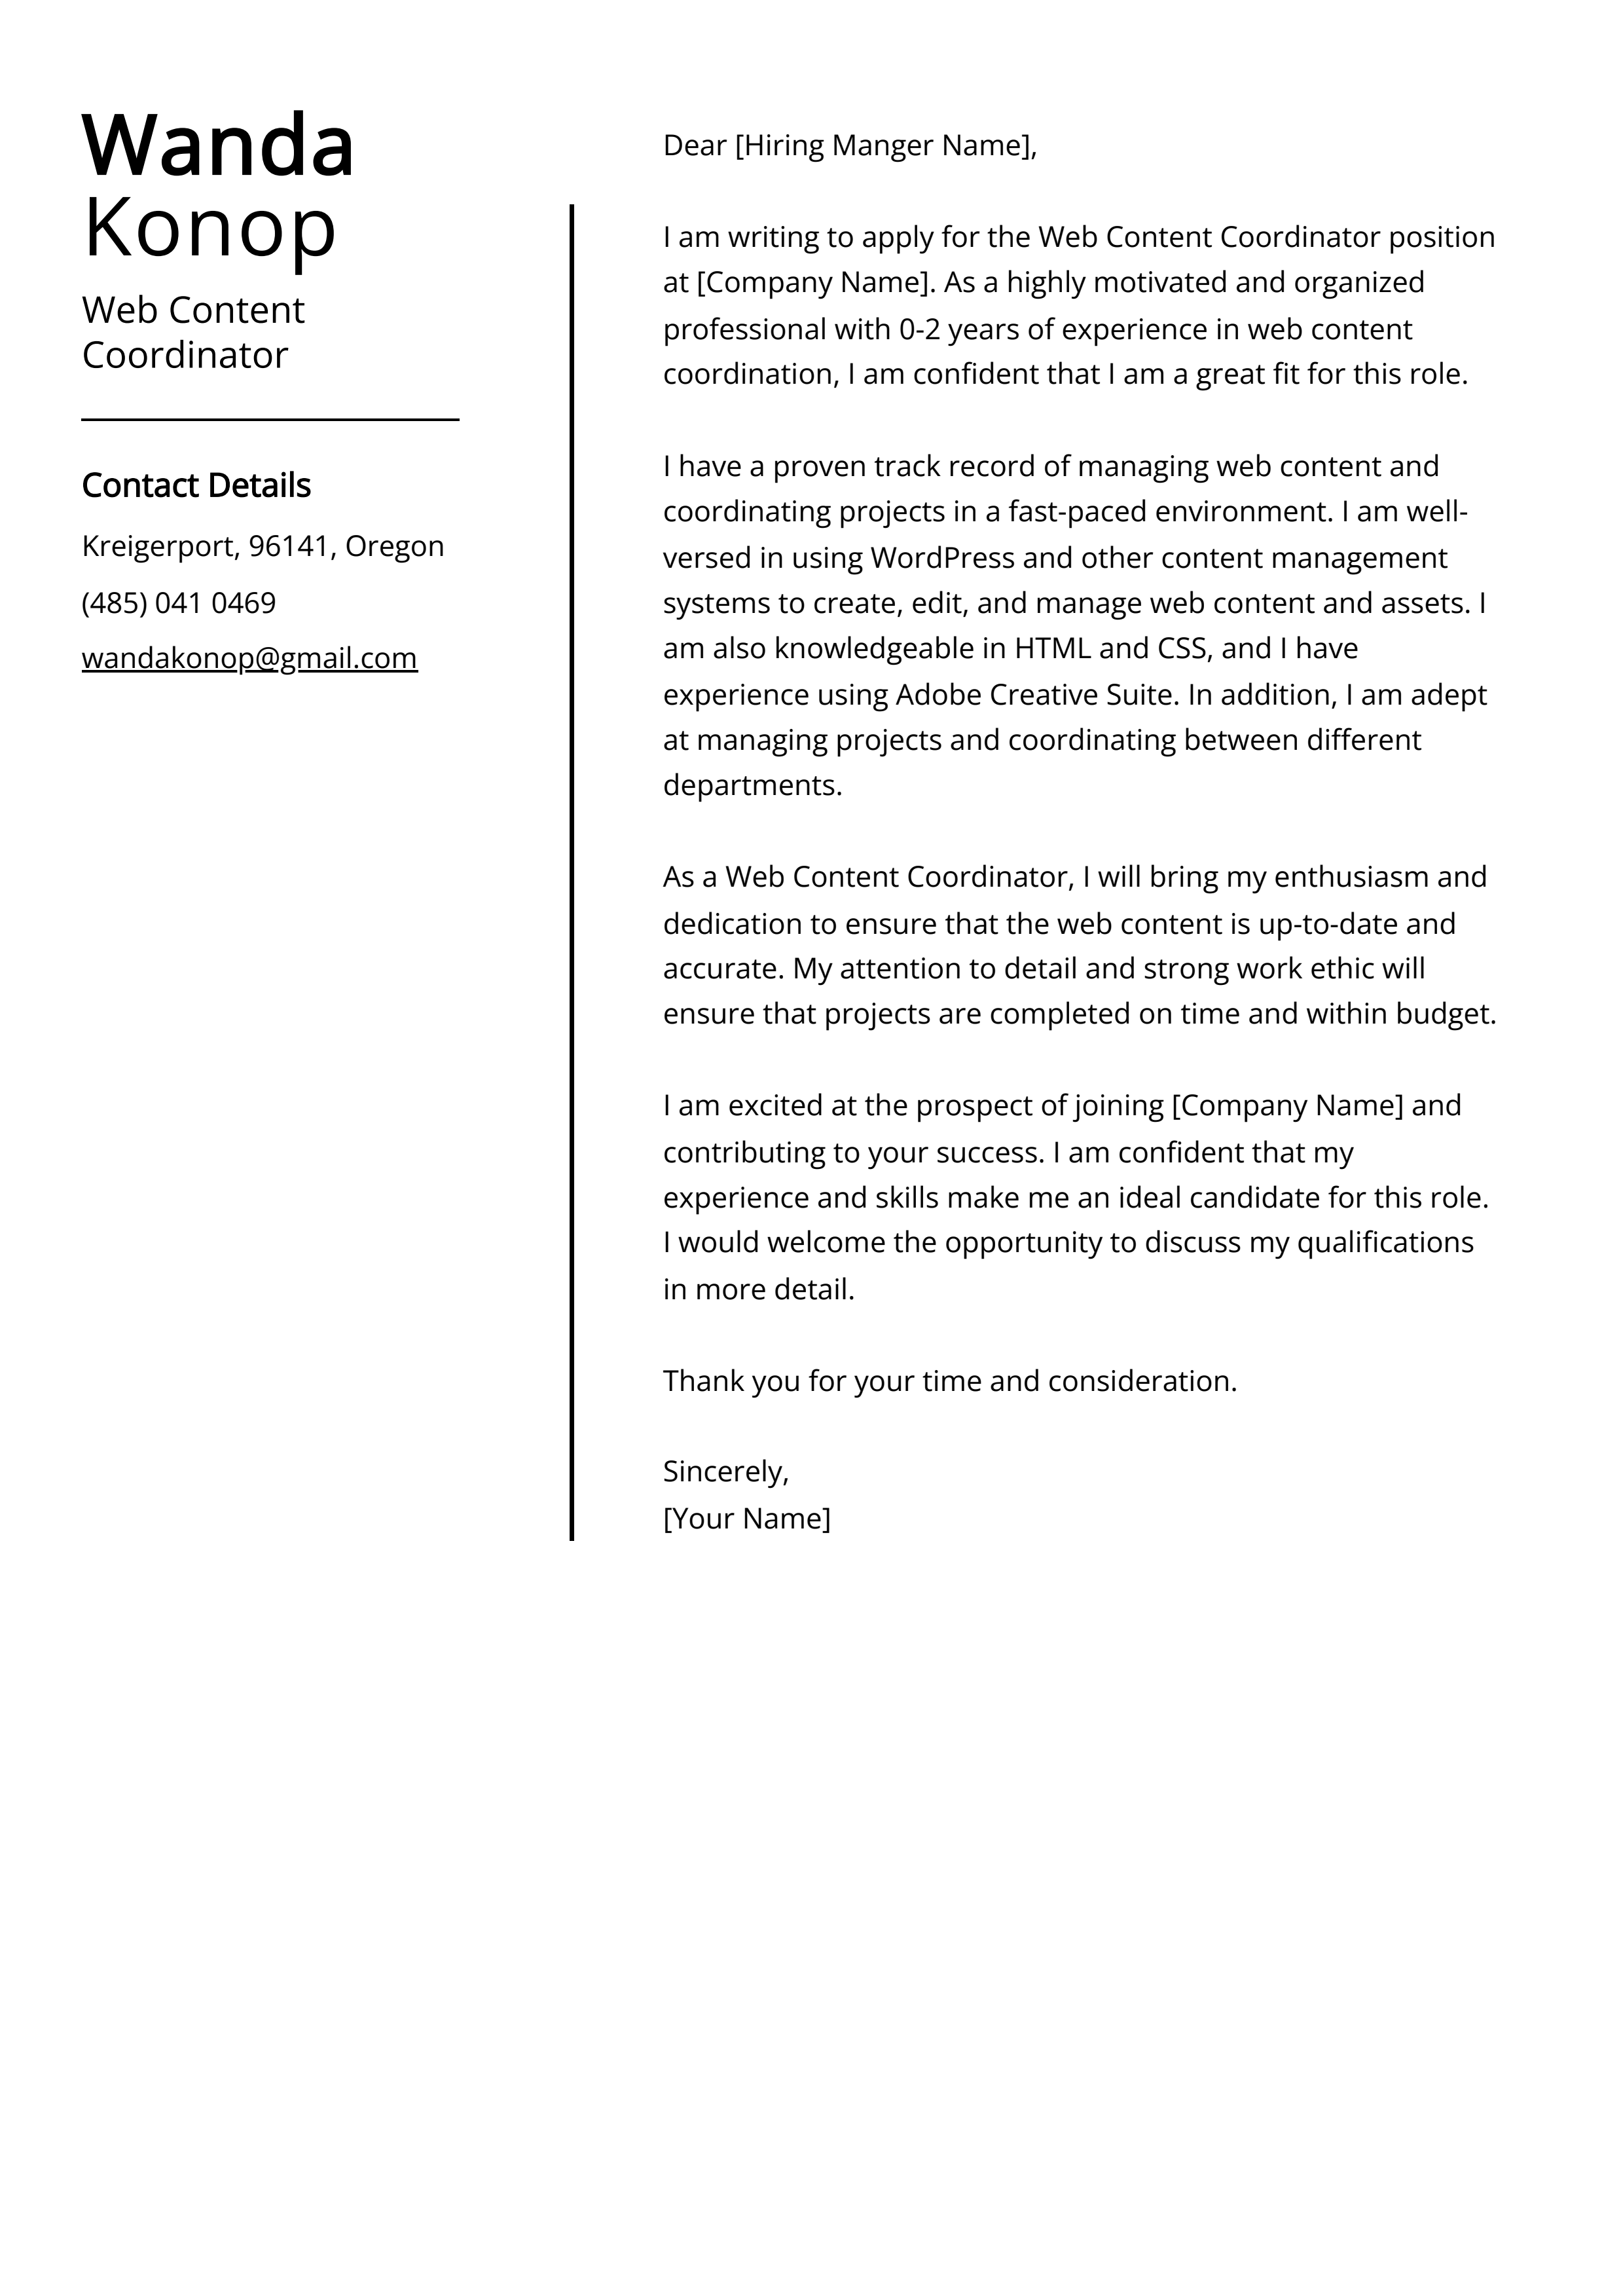 Web Content Coordinator Cover Letter Example